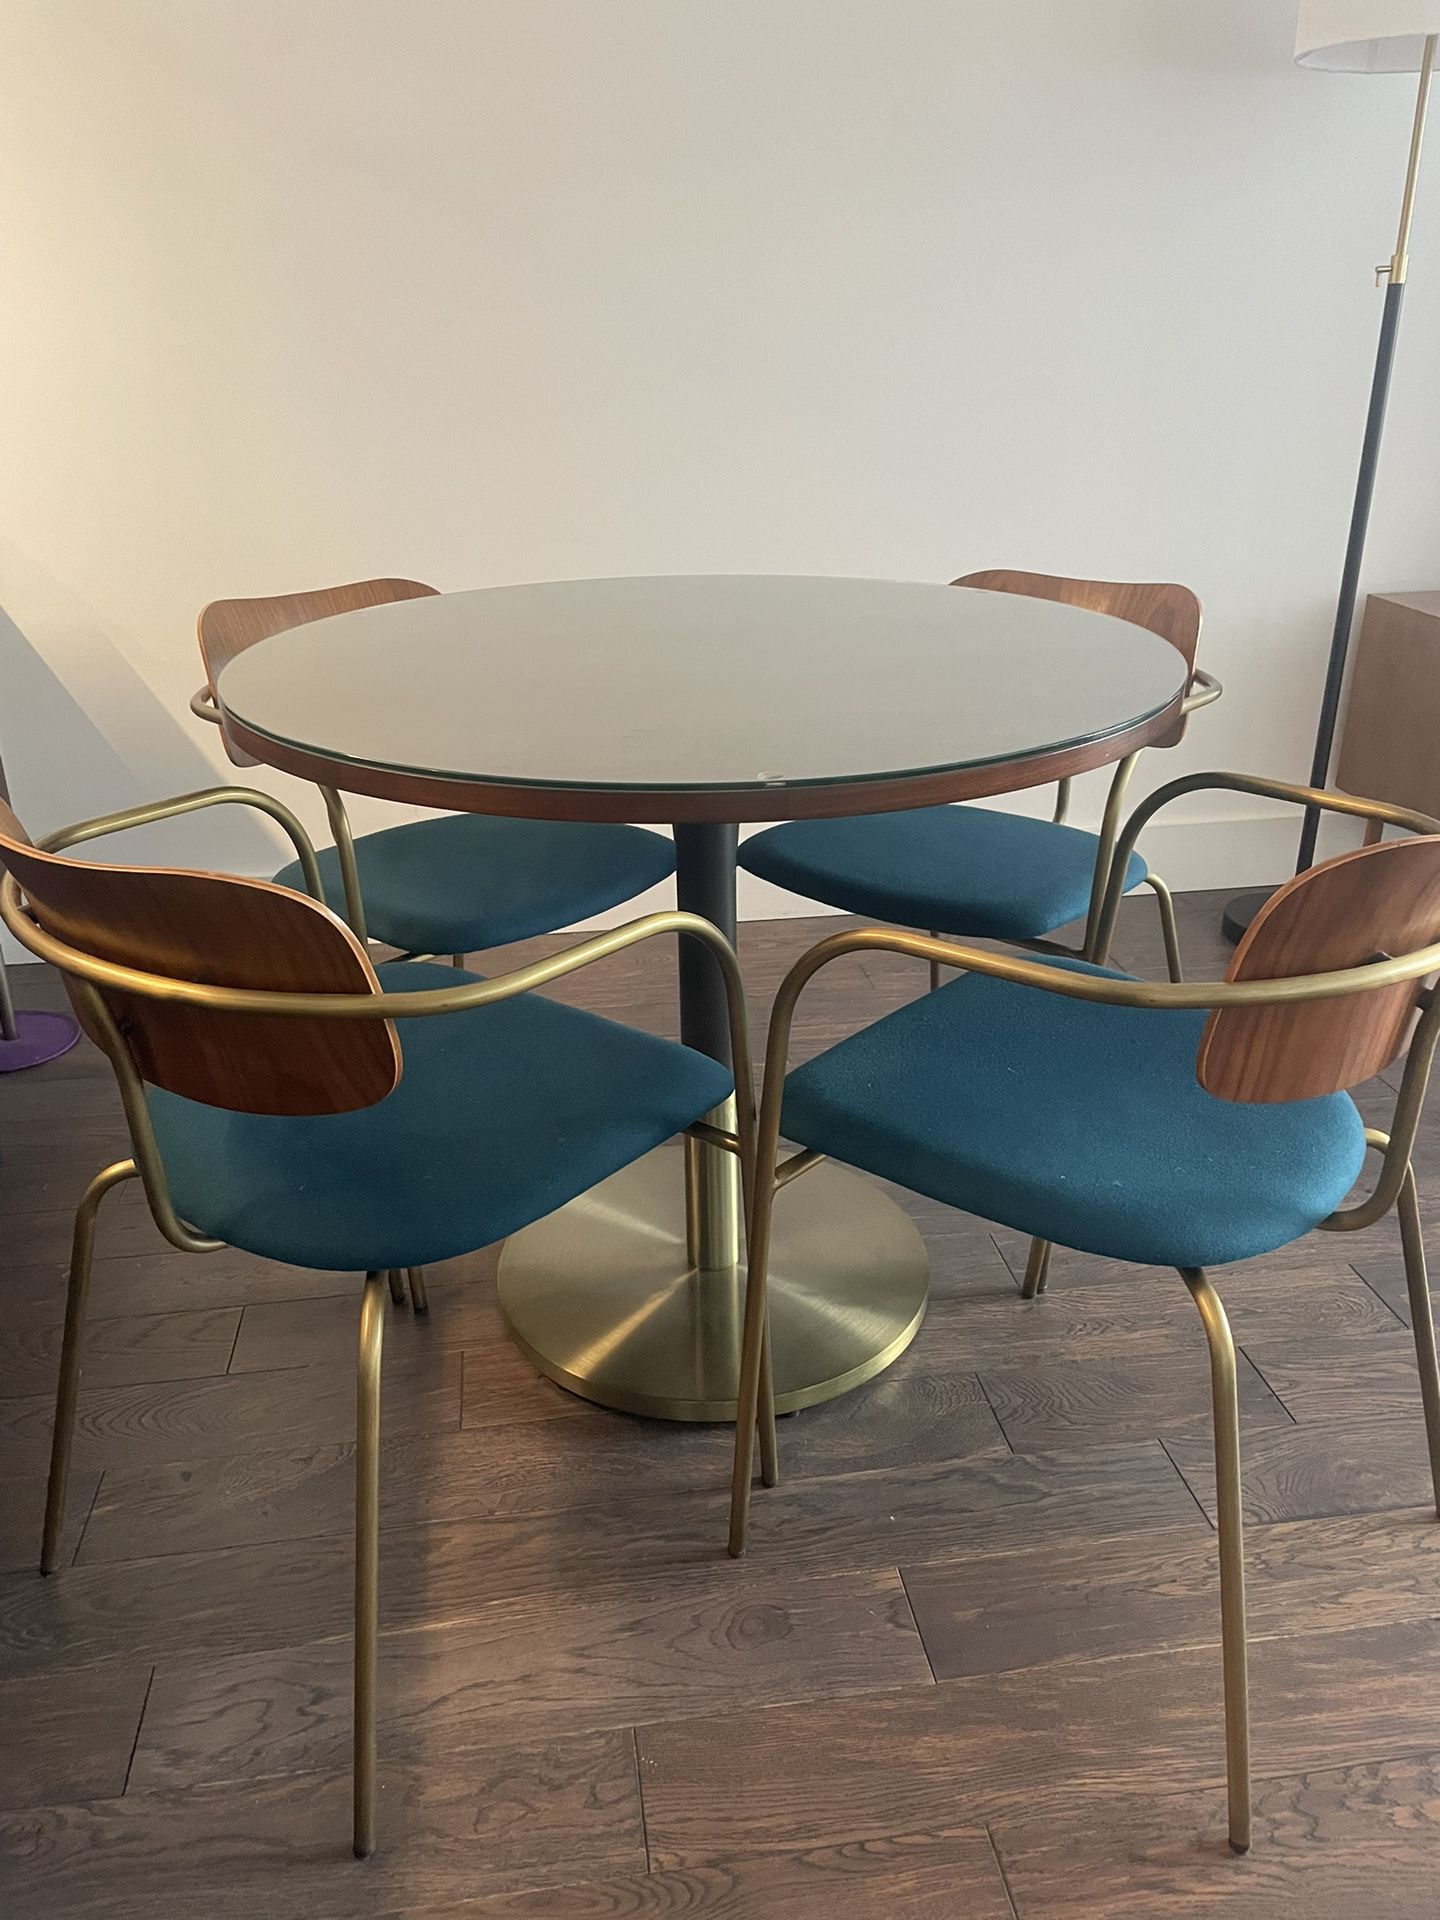 West Elm's Orbit Restaurant Dining Table - Wood - Round - 36”Diameter Bronze/Brass With Glass Table Cover Included